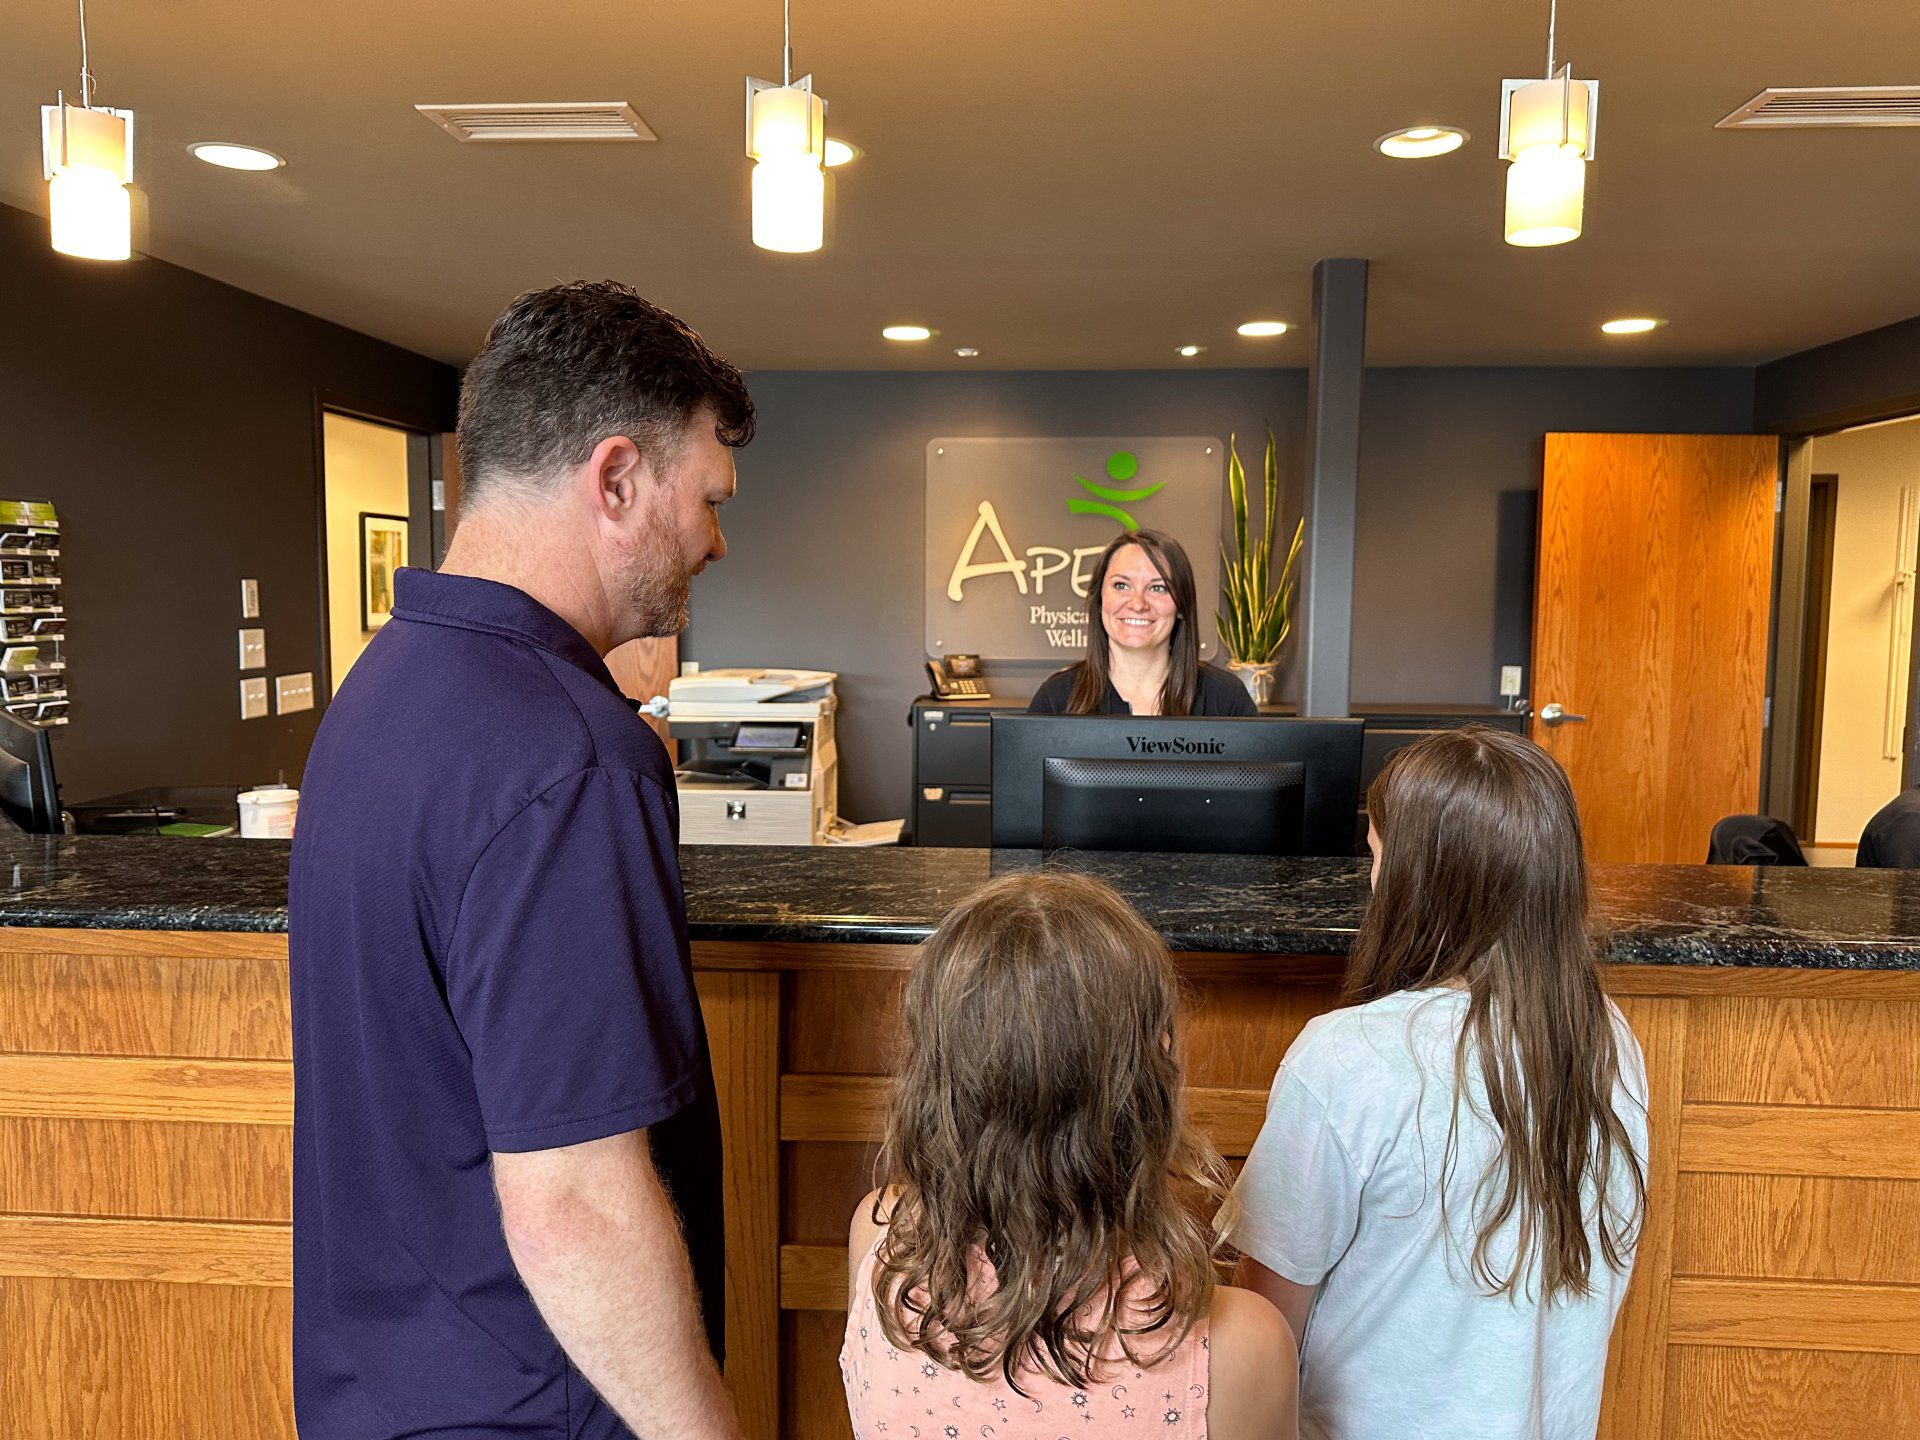 A man and two children approach the reception desk where a smiling receptionist, adhering to the Privacy Policy, awaits to assist them at a professional office.